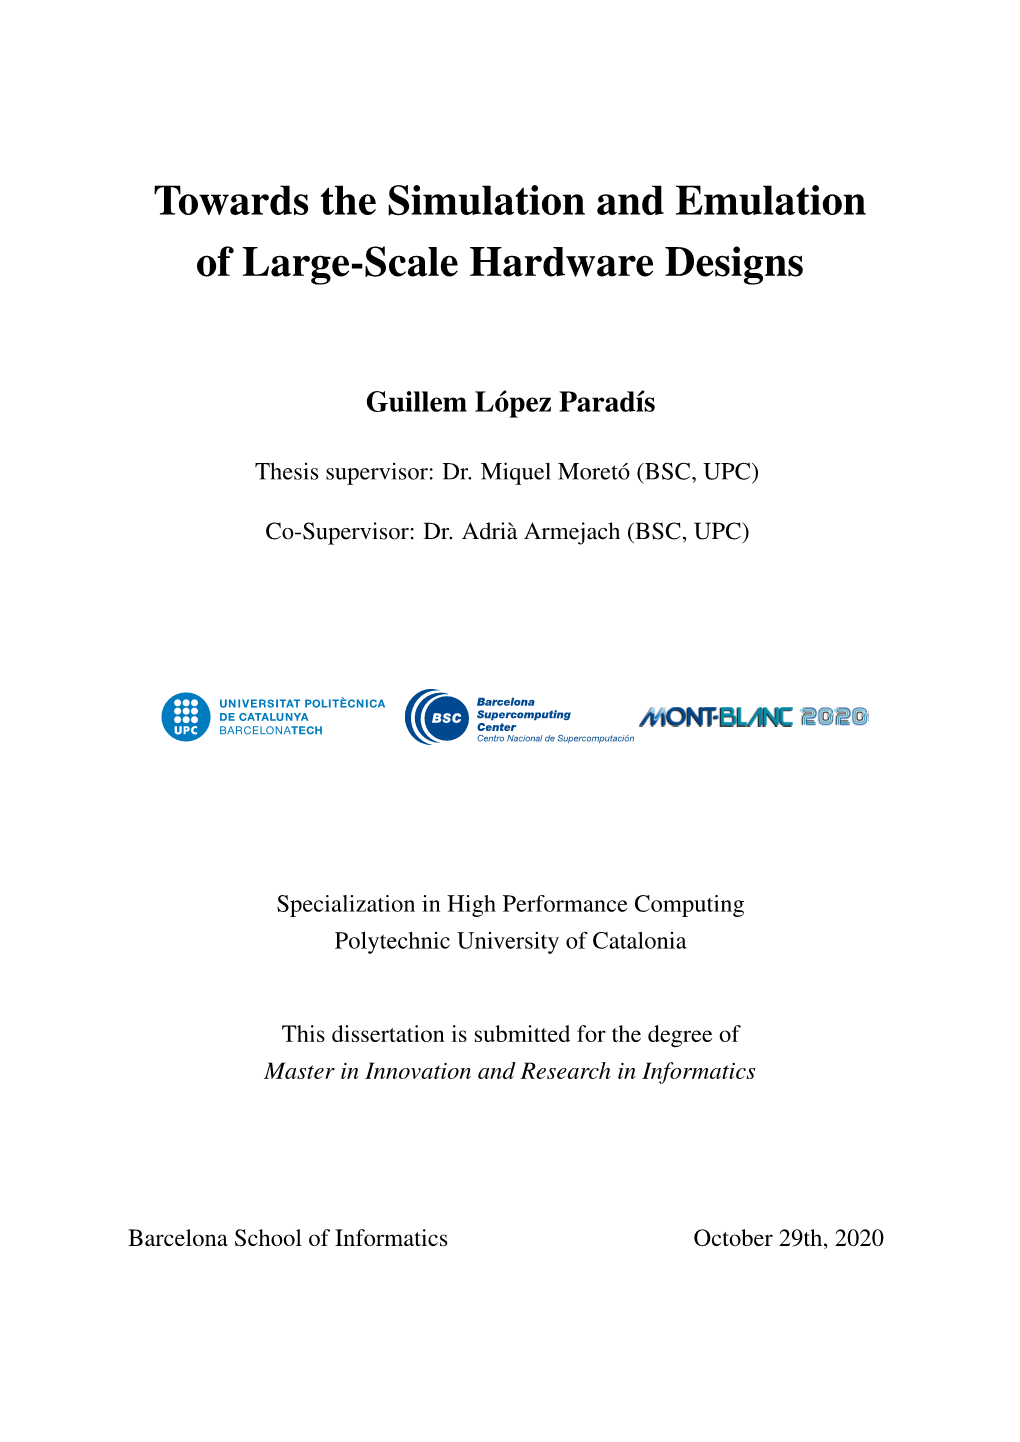 Towards the Simulation and Emulation of Large-Scale Hardware Designs